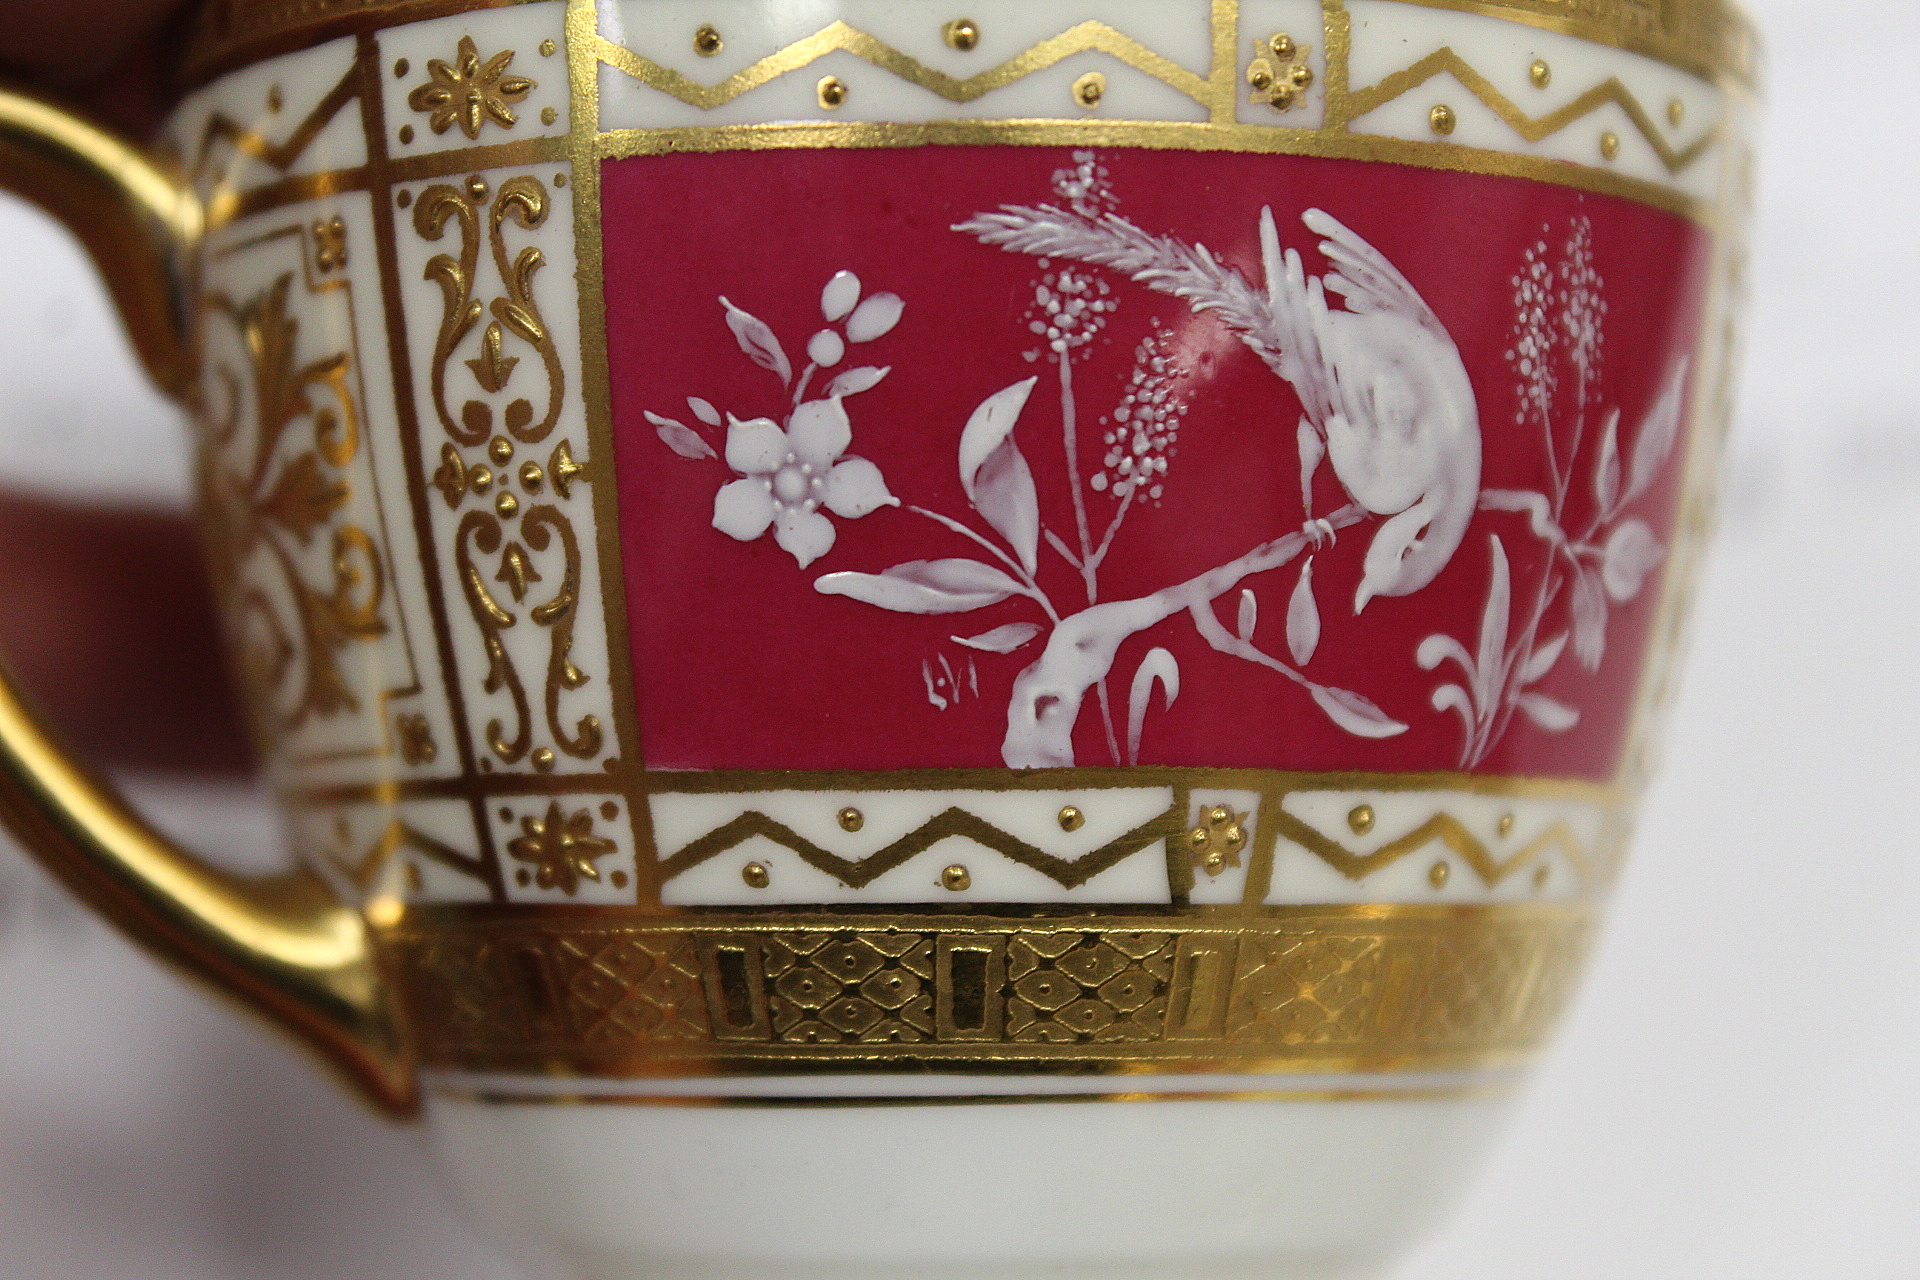 Minton bone china pate sur pate cabinet cup and saucer with cerise and white panels of exotic - Image 26 of 26